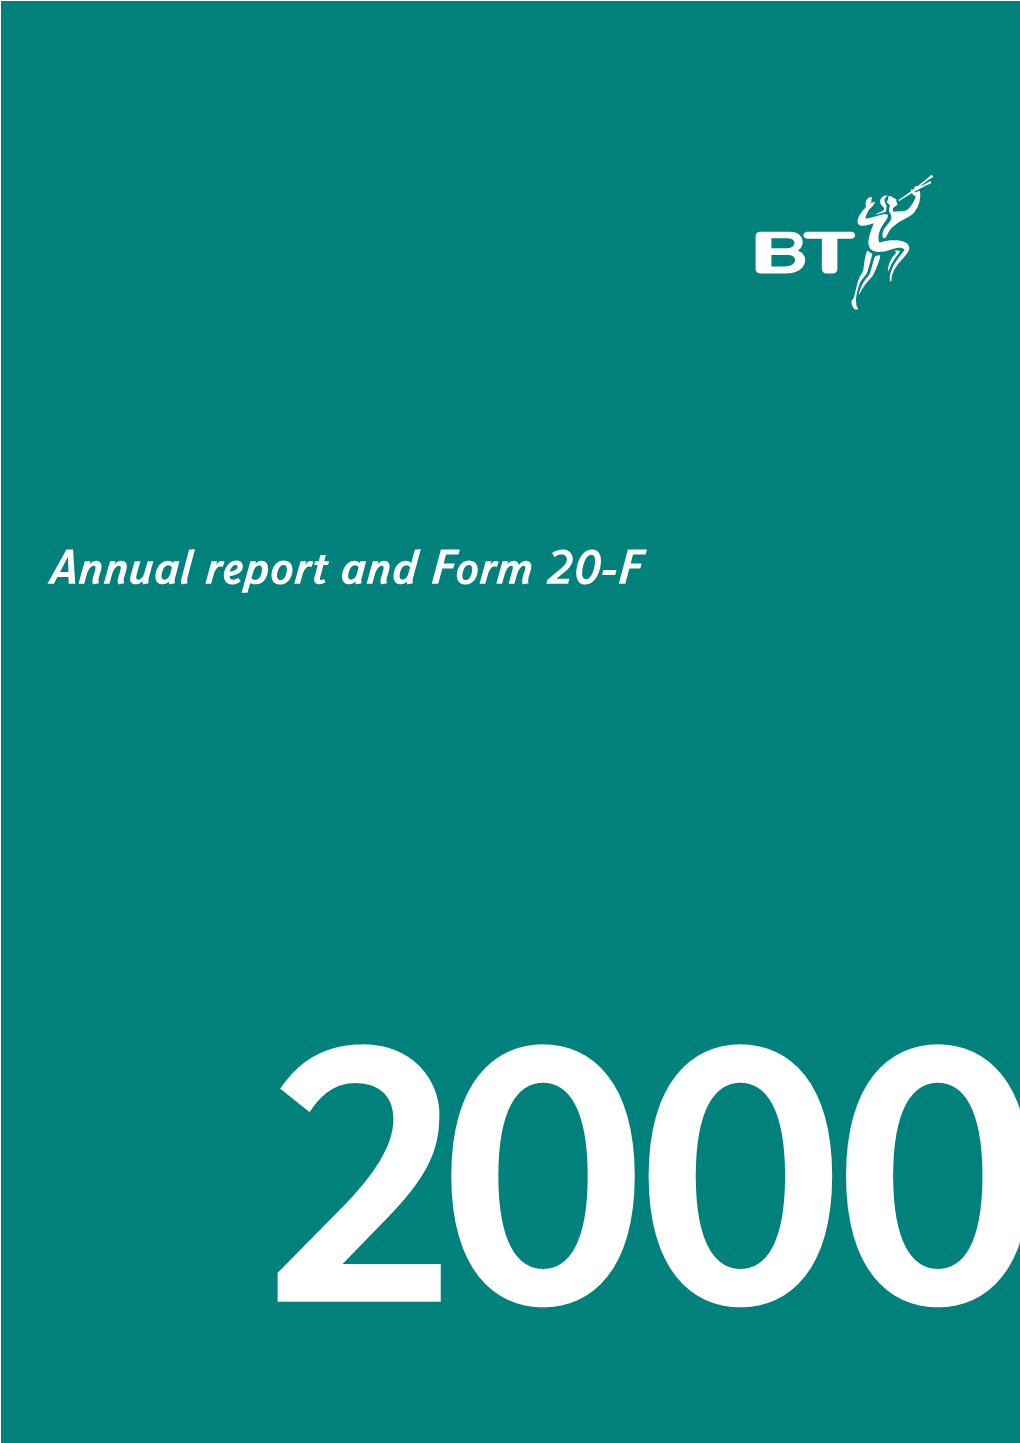 Annual Report and Form 20-F BT Has Set Itself an Ambitious Vision: to Be the Most Successful Worldwide Communications Group